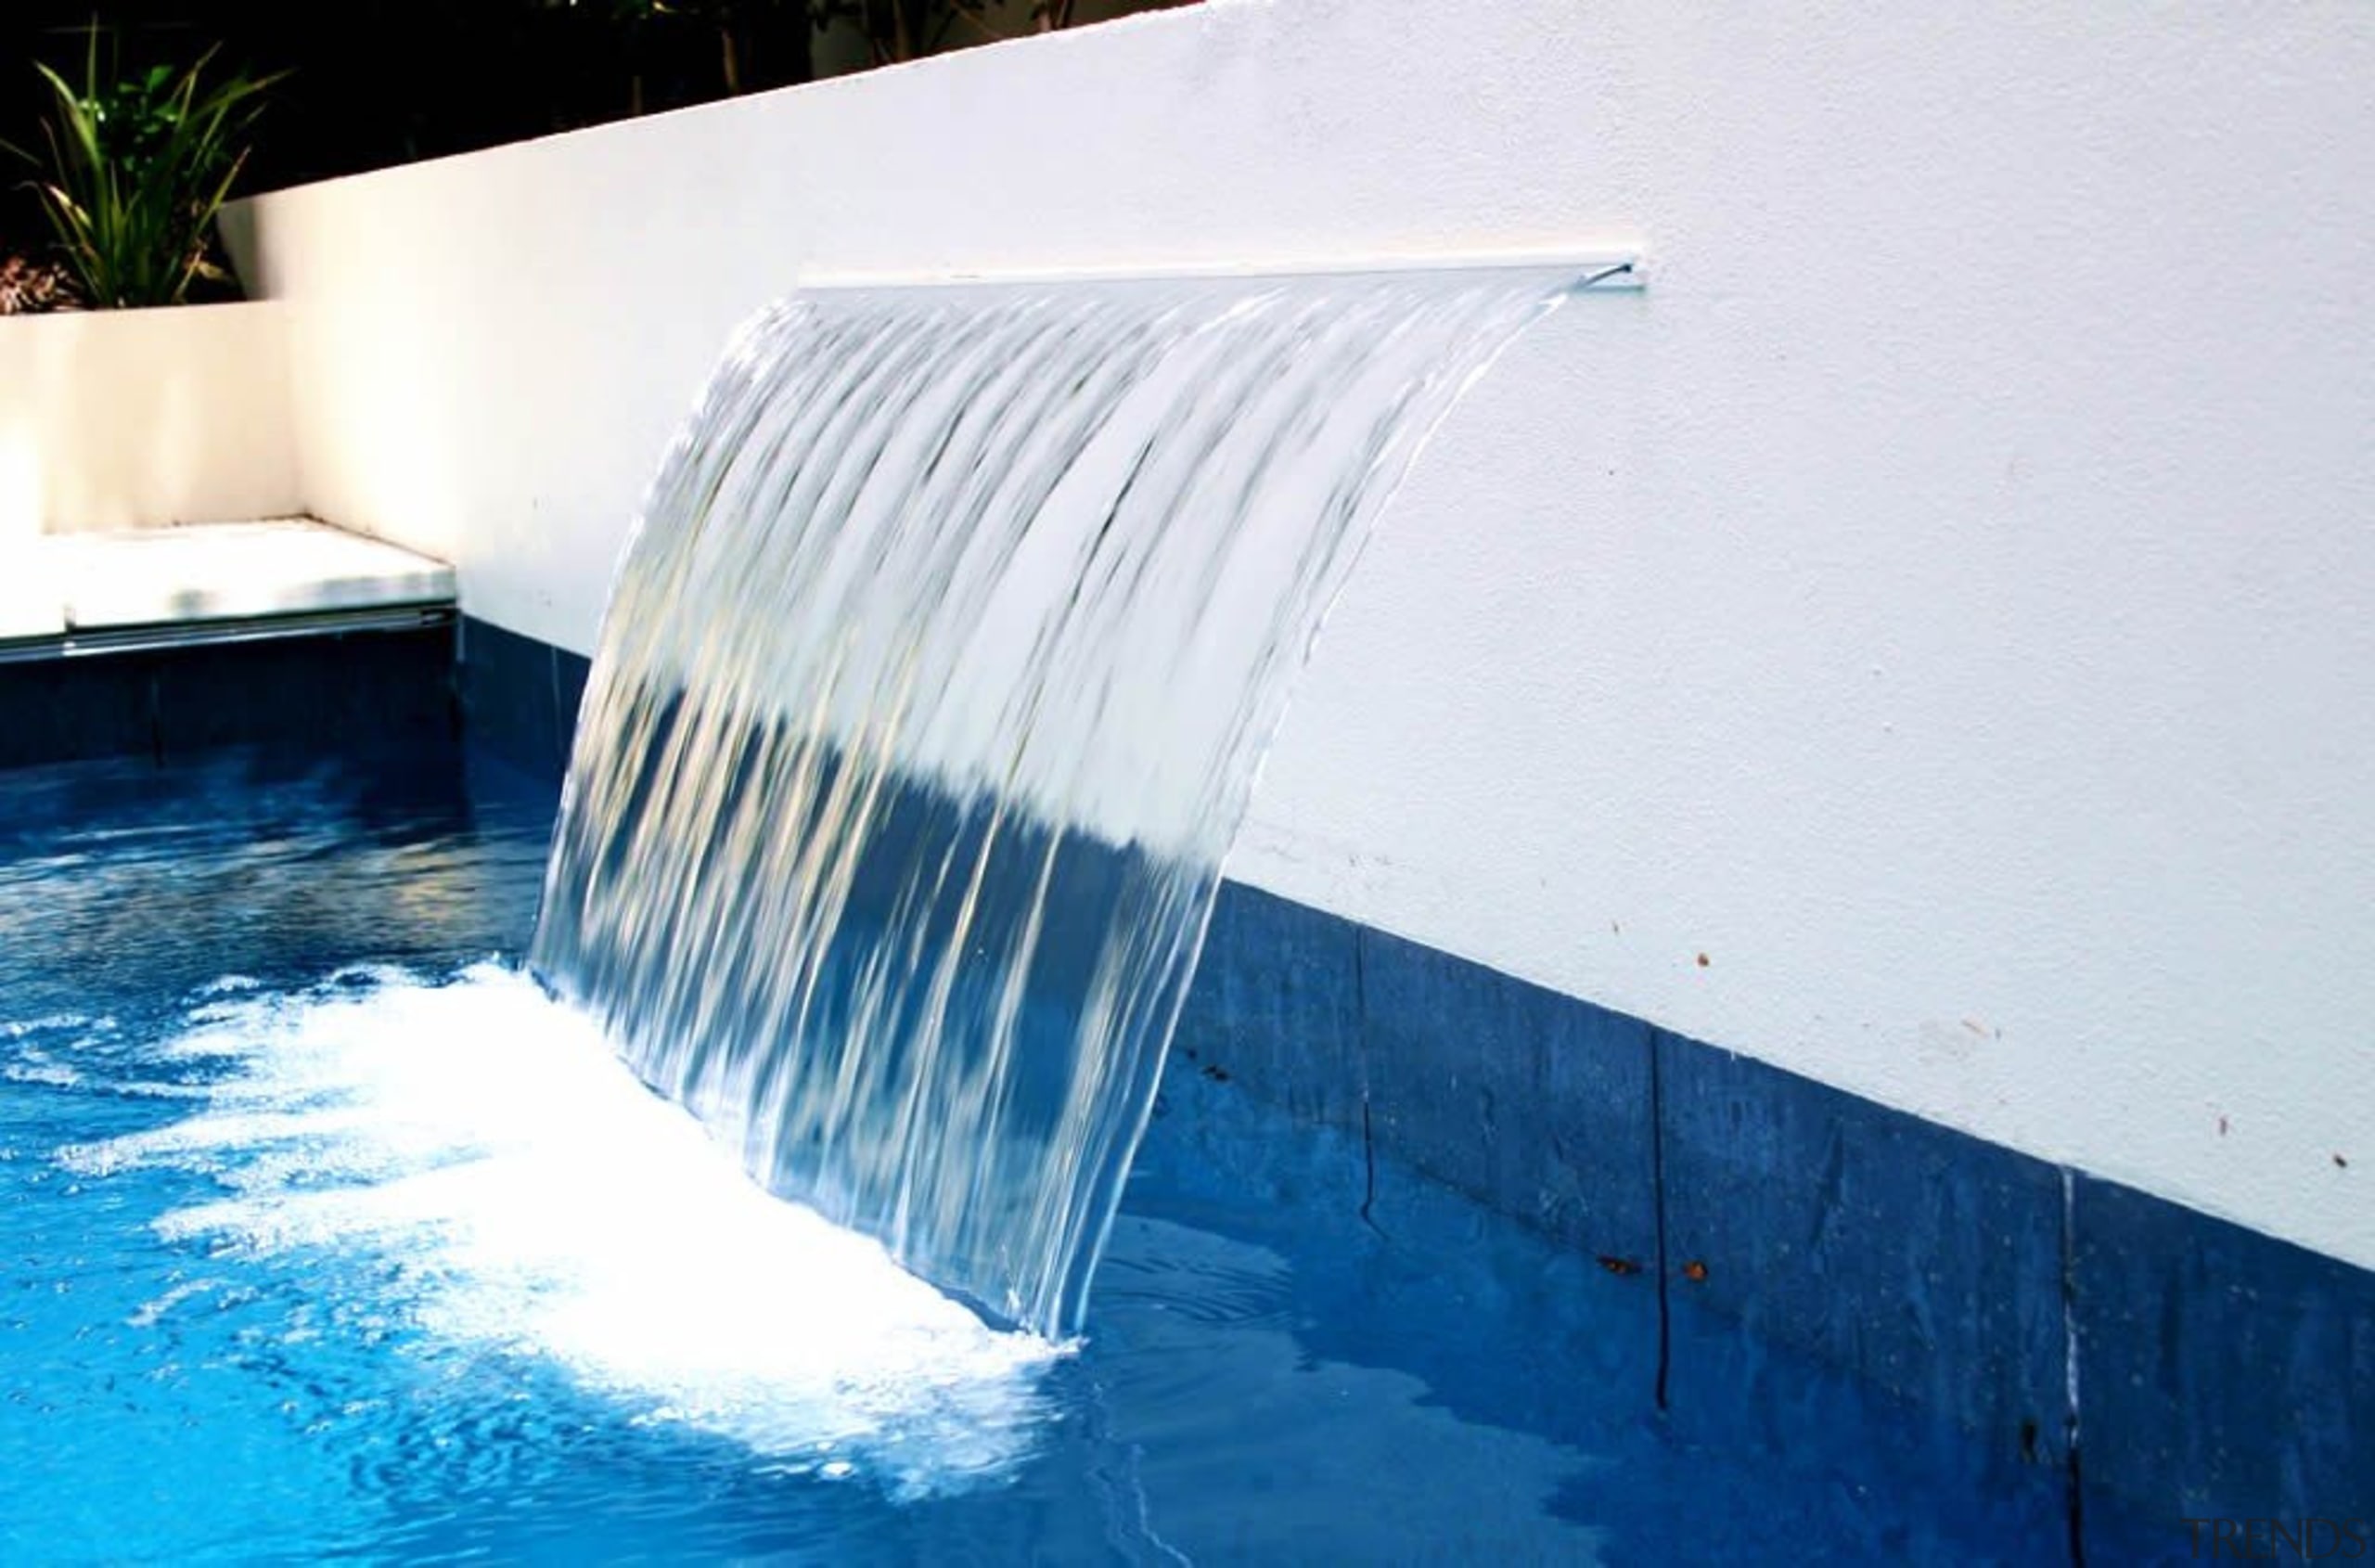 Waterfall - swimming pool | water | water swimming pool, water, water feature, water resources, white